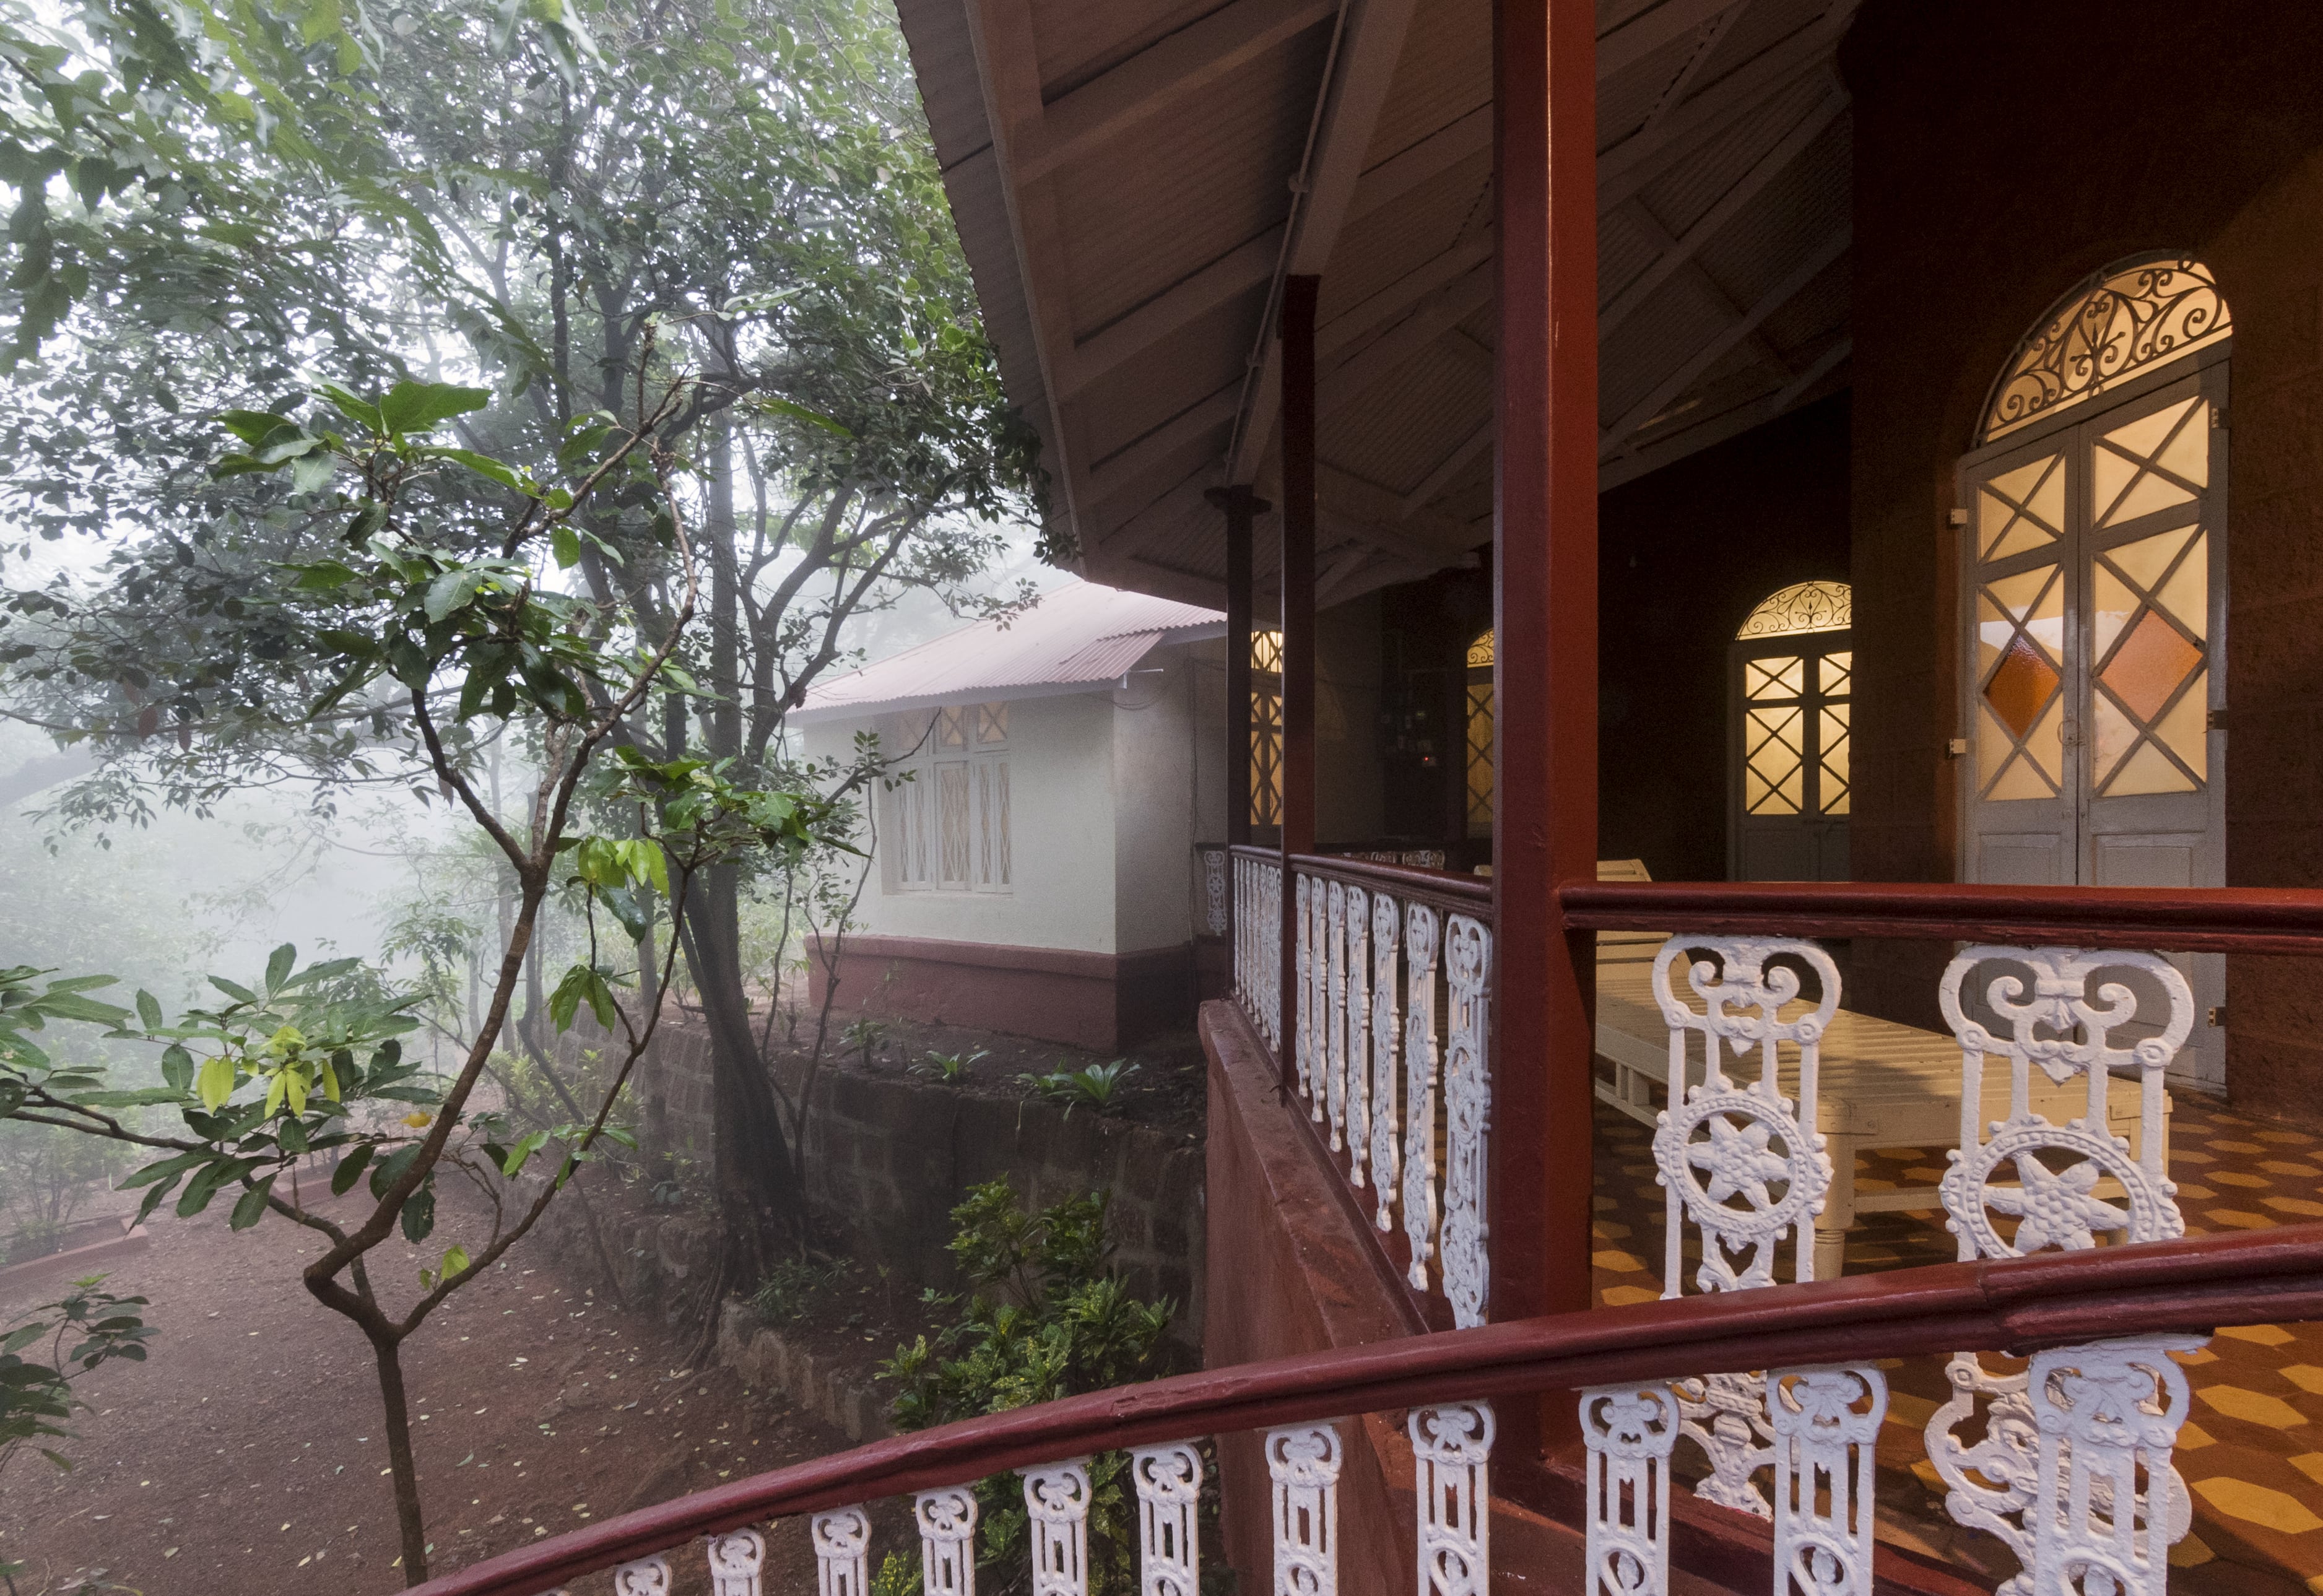 Rent this heritage villa in Matheran hill station to experience what it's like to live in a jungle.